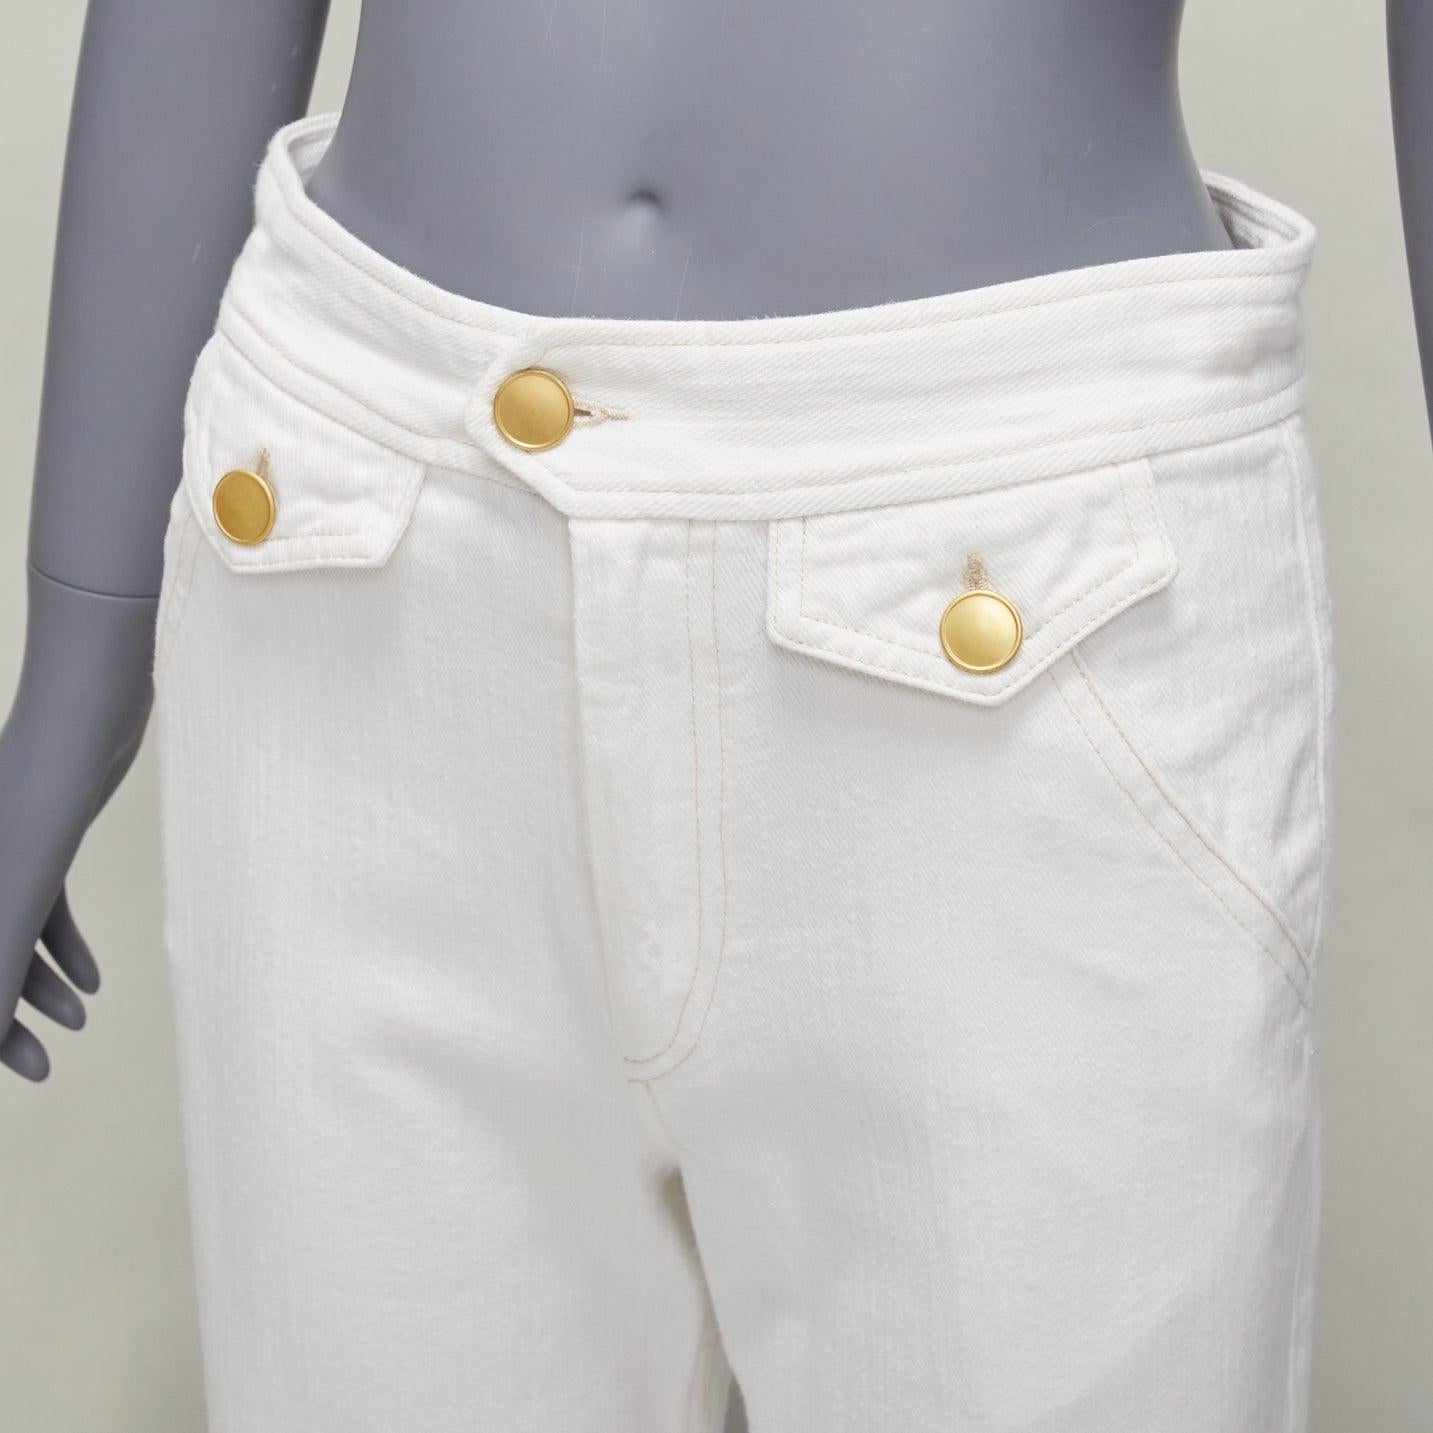 ISABEL MARANT white cotton gold buttons nautical wide crop pants FR36 S
Reference: NKLL/A00209
Brand: Isabel Marant
Material: Cotton
Color: White, Gold
Pattern: Solid
Closure: Button
Extra Details: 2 pockets at back.
Made in: